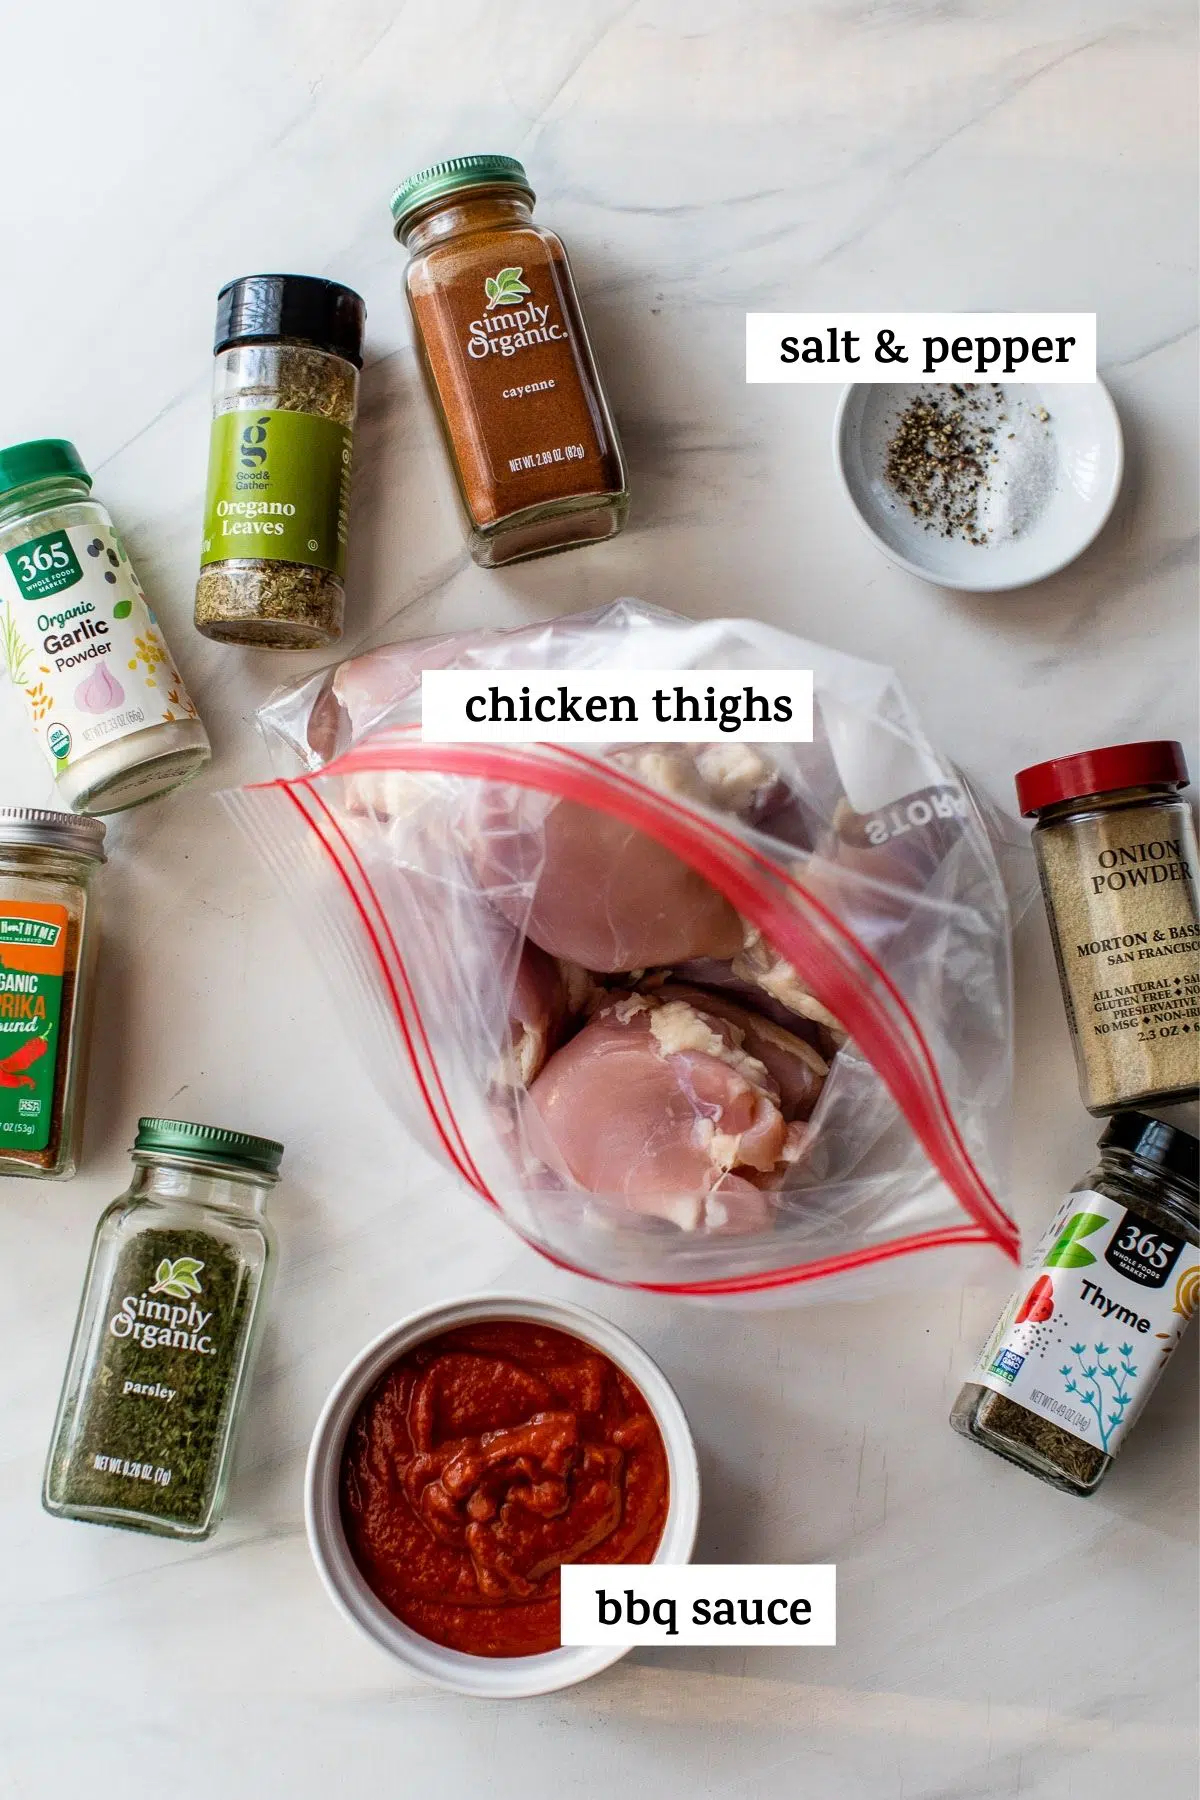 raw chicken in a plastic bag beside several different spices